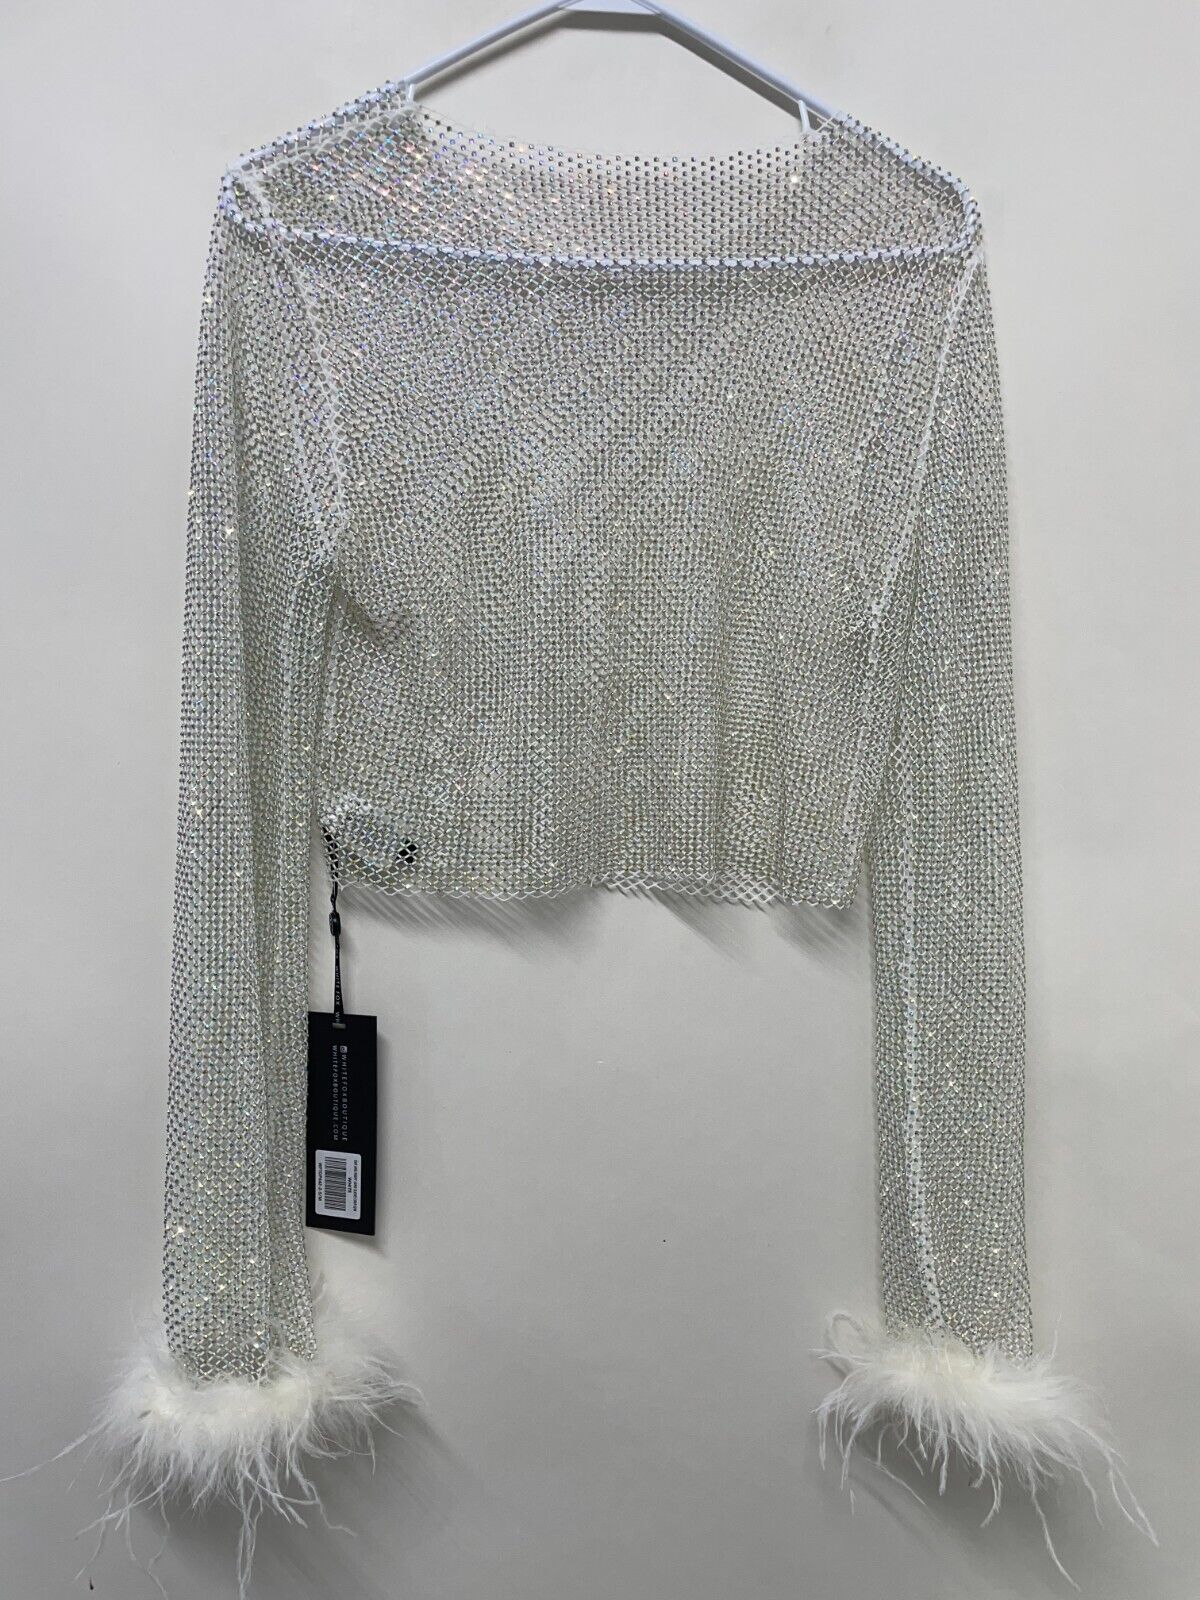 White Fox Women S/M Day And Night Long Sleeve Crop Top White Sheer Diamante Rave